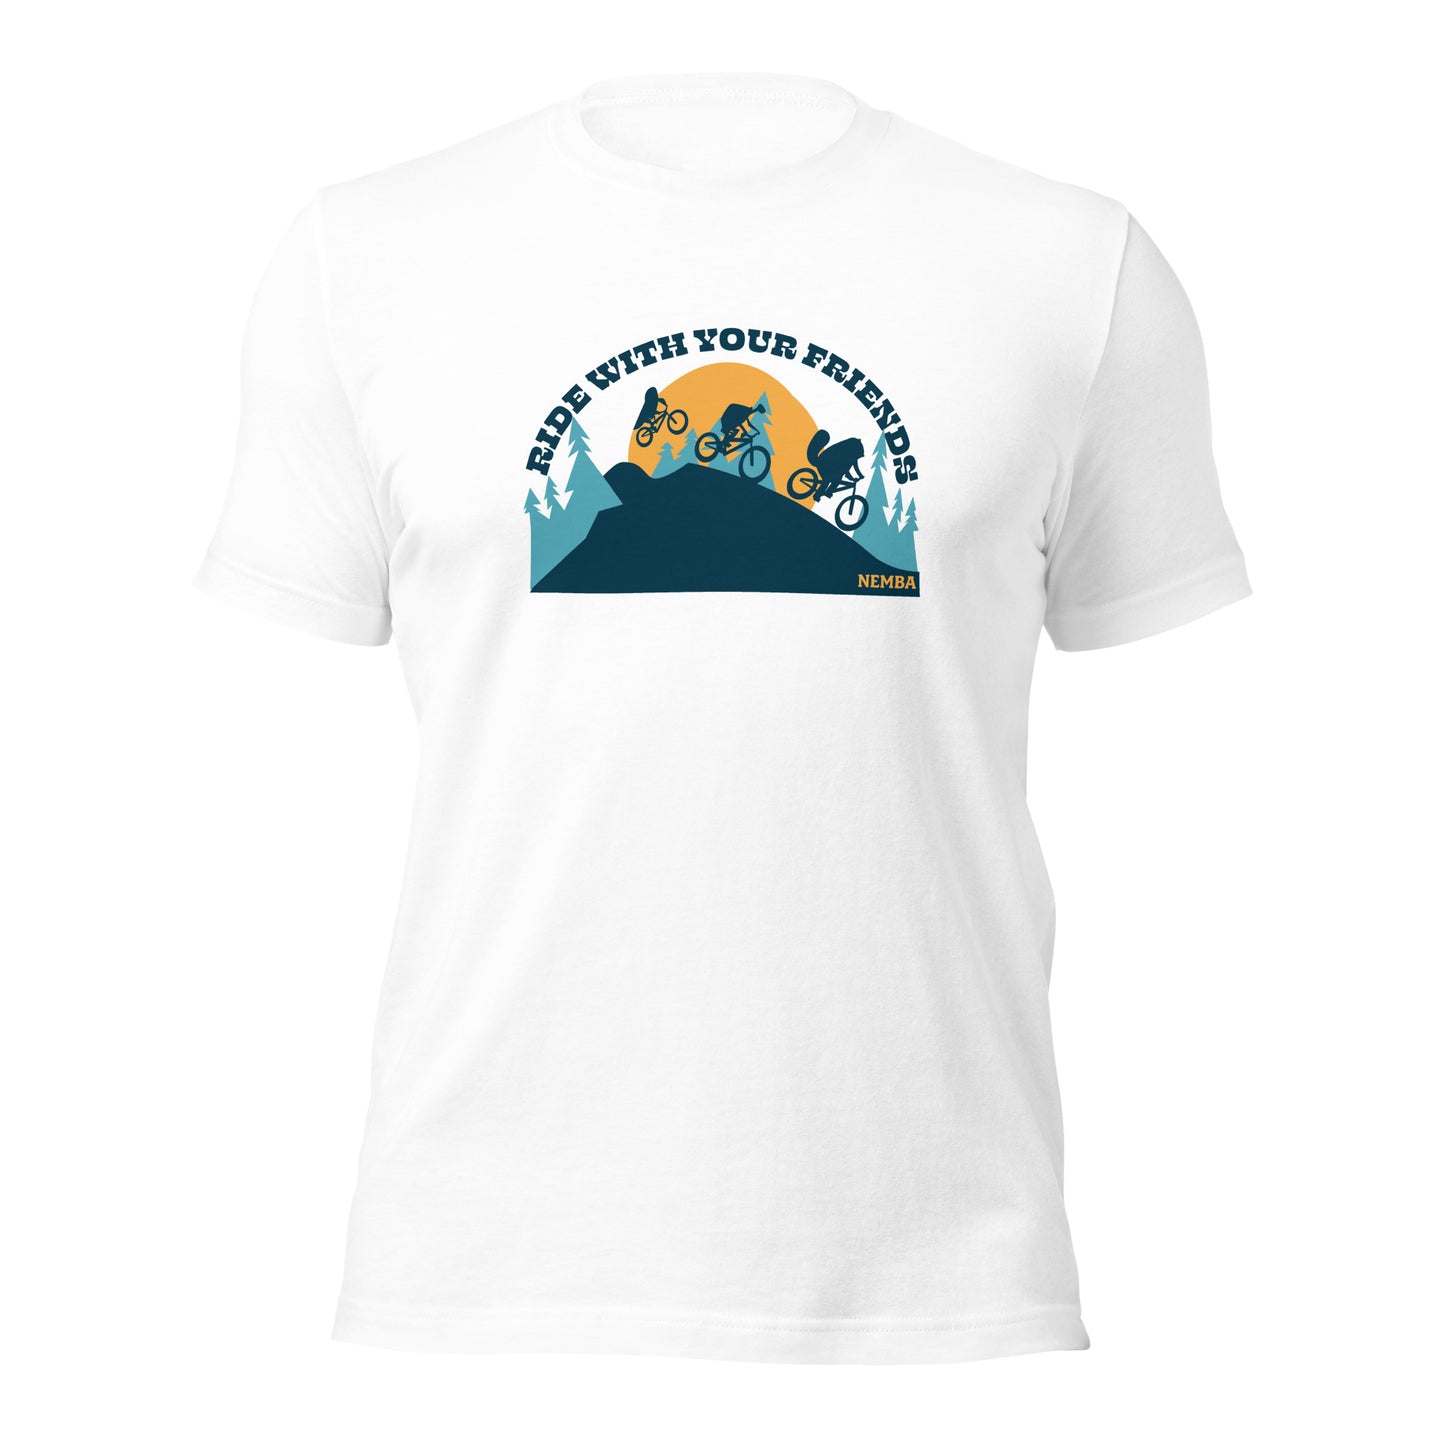 Unisex T-Shirt, Ride With Your Friends